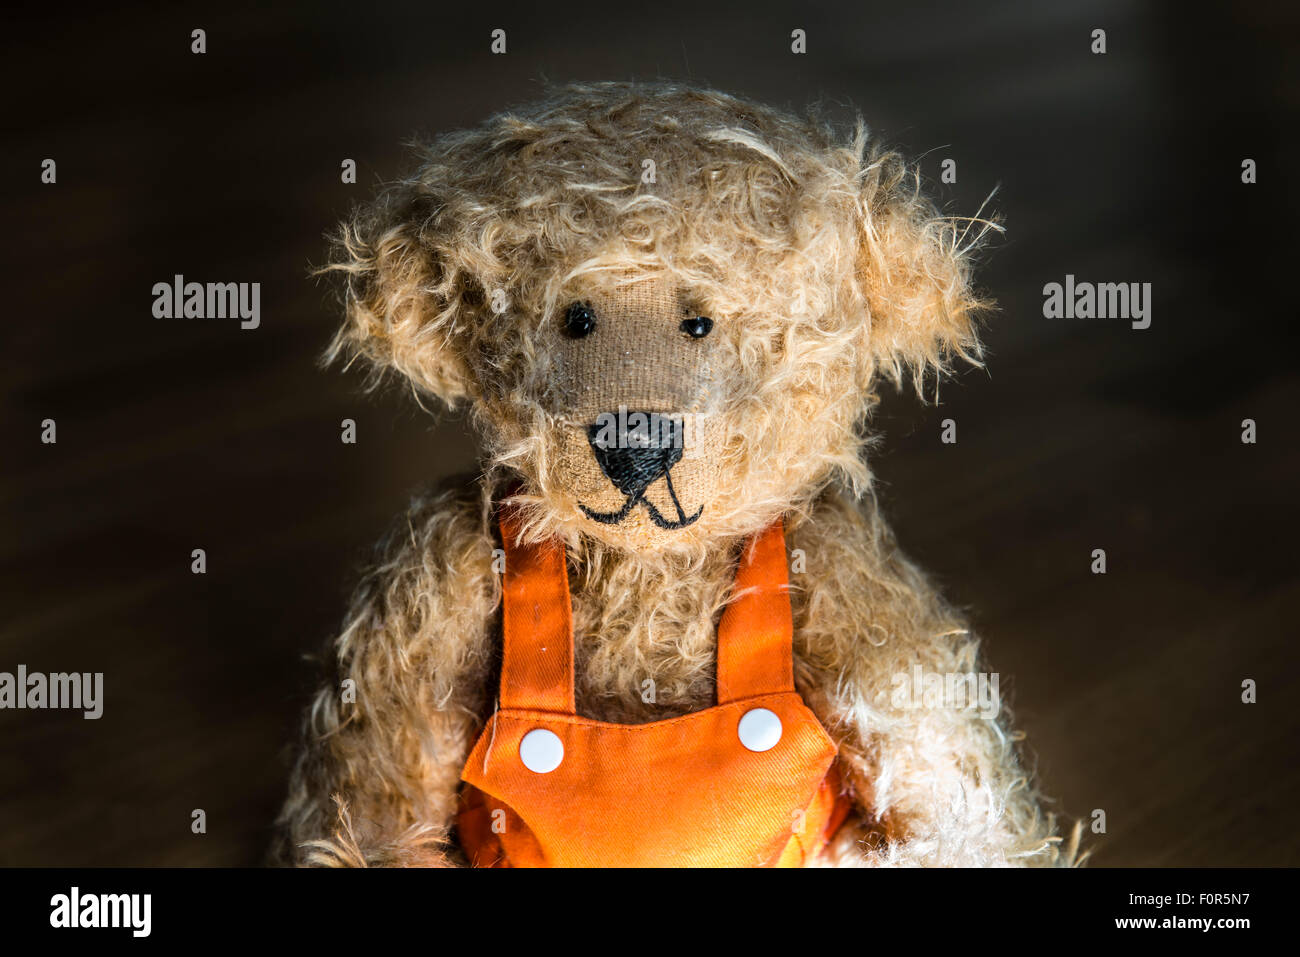 Light brown teddy bear, with orange overalls, portrait against a ...